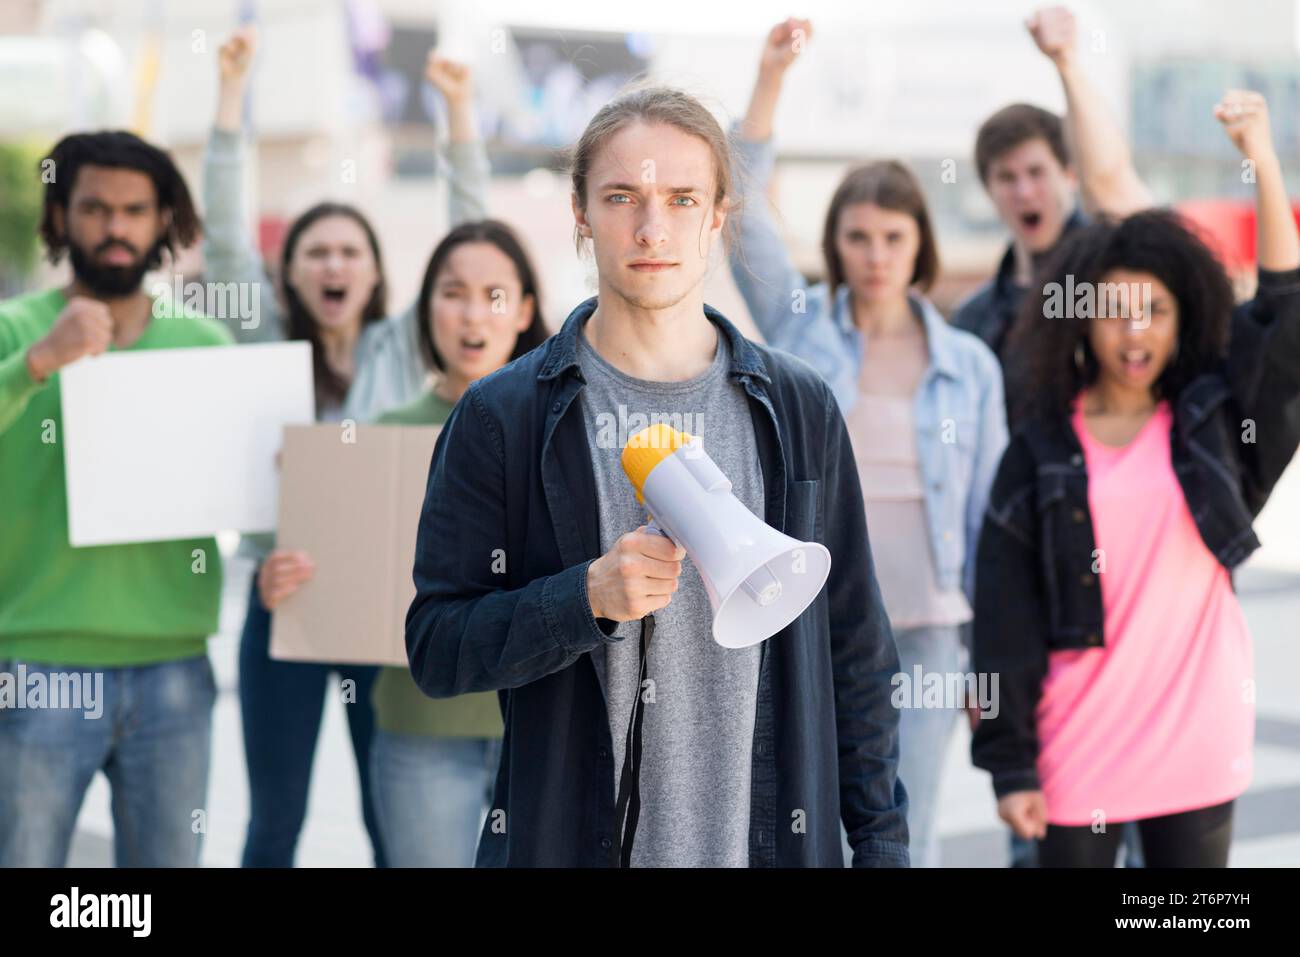 Group people protesting using megaphones Stock Photo